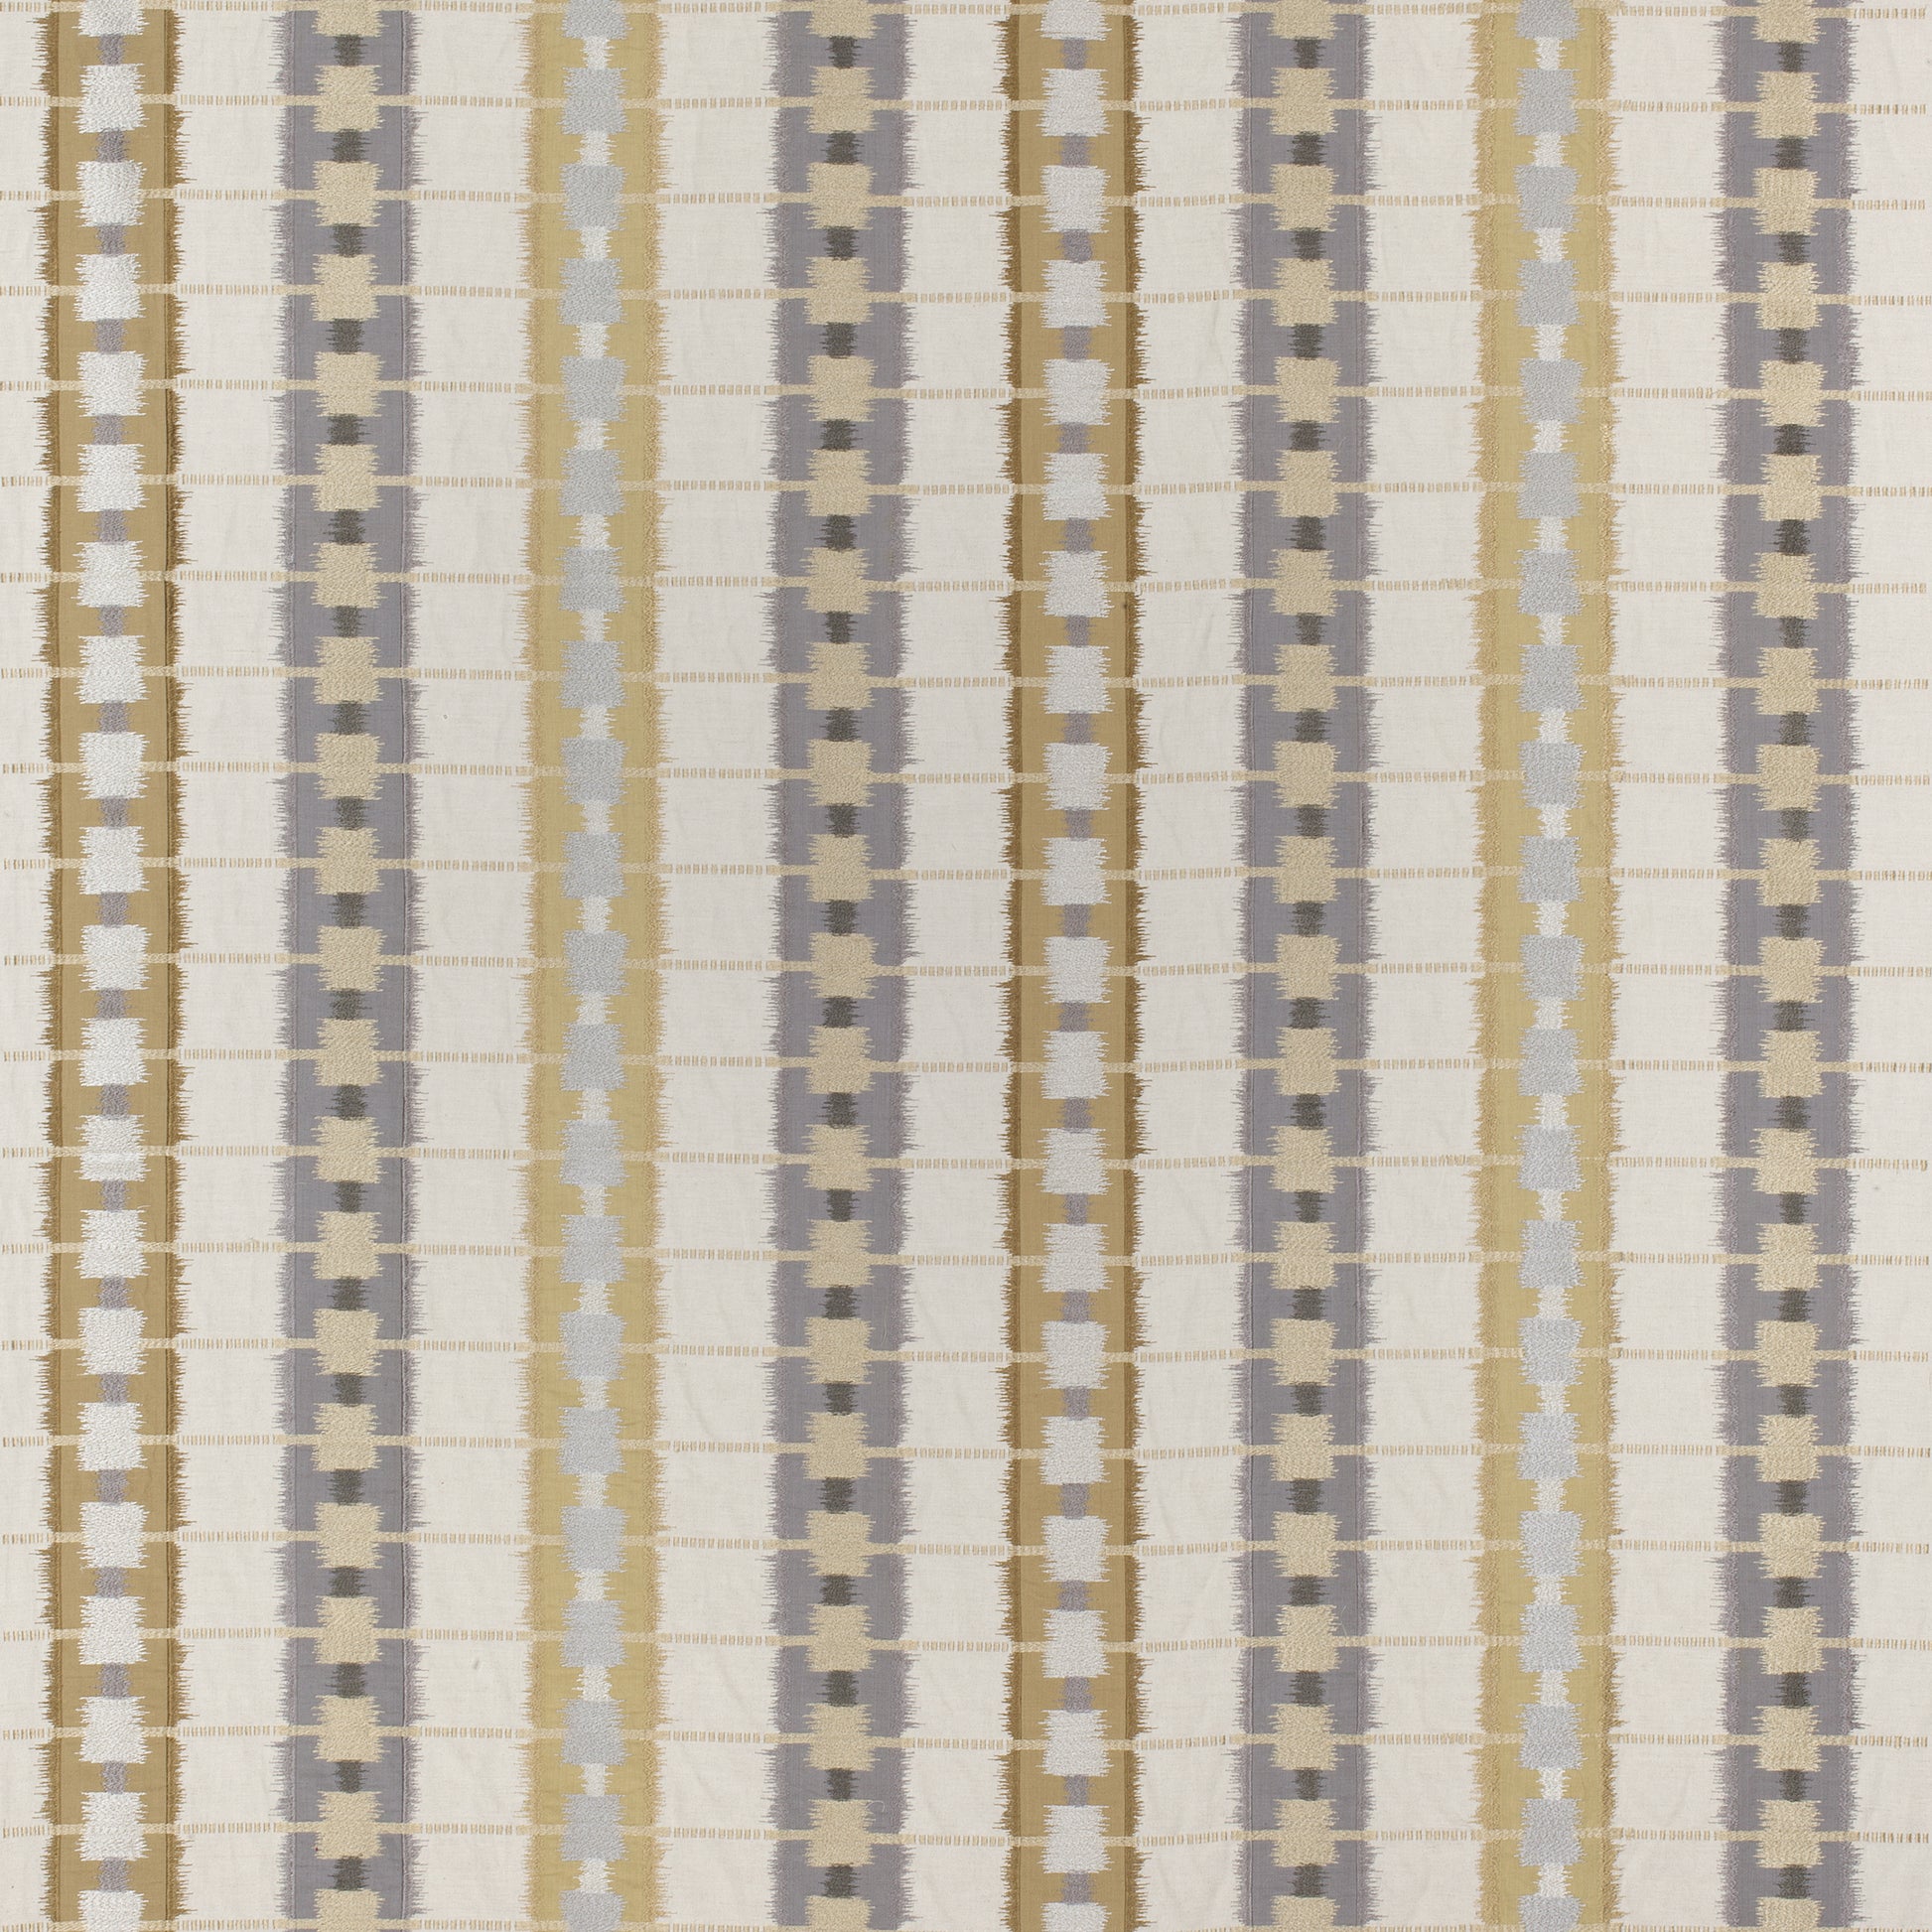 Purchase Thibaut Fabric Item# W788712 pattern name Sri Lanka Embroidery color Grey